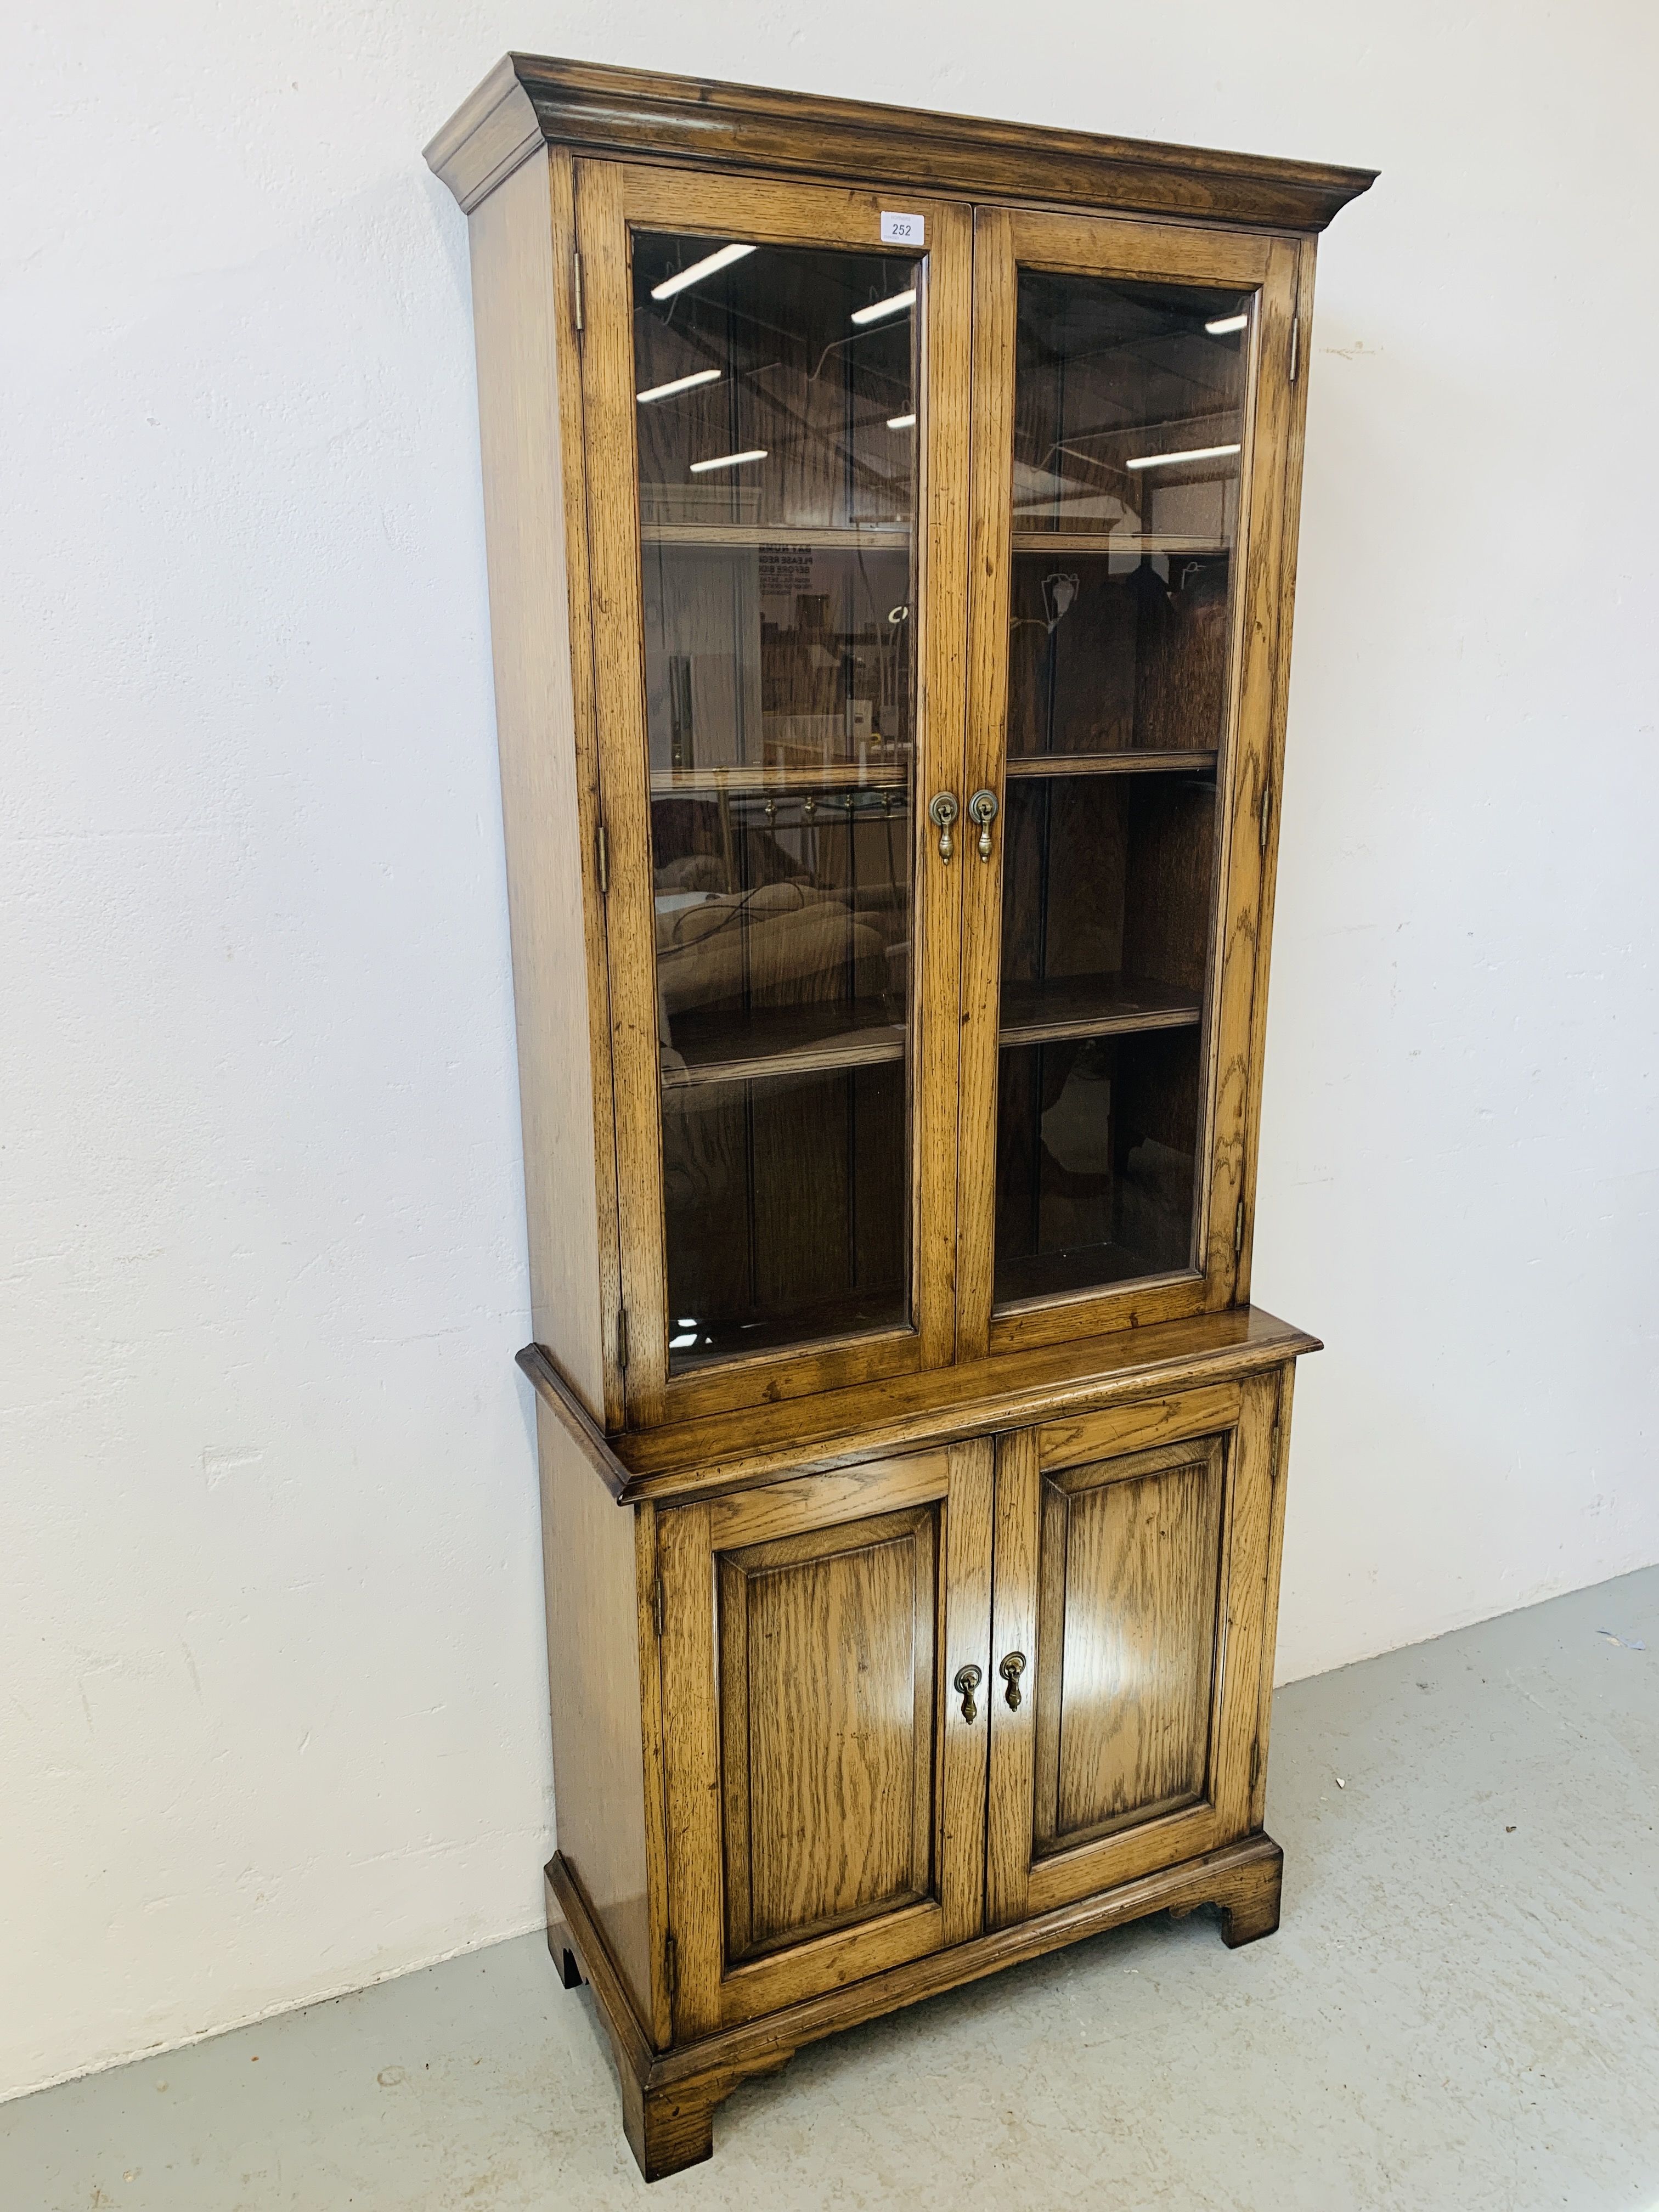 A QUALITY REPRODUCTION OAK BOOKCASE WITH CUPBOARD BASE BY DAVID NOTTAGE CABINET MAKER - W 75cm. - Image 3 of 14